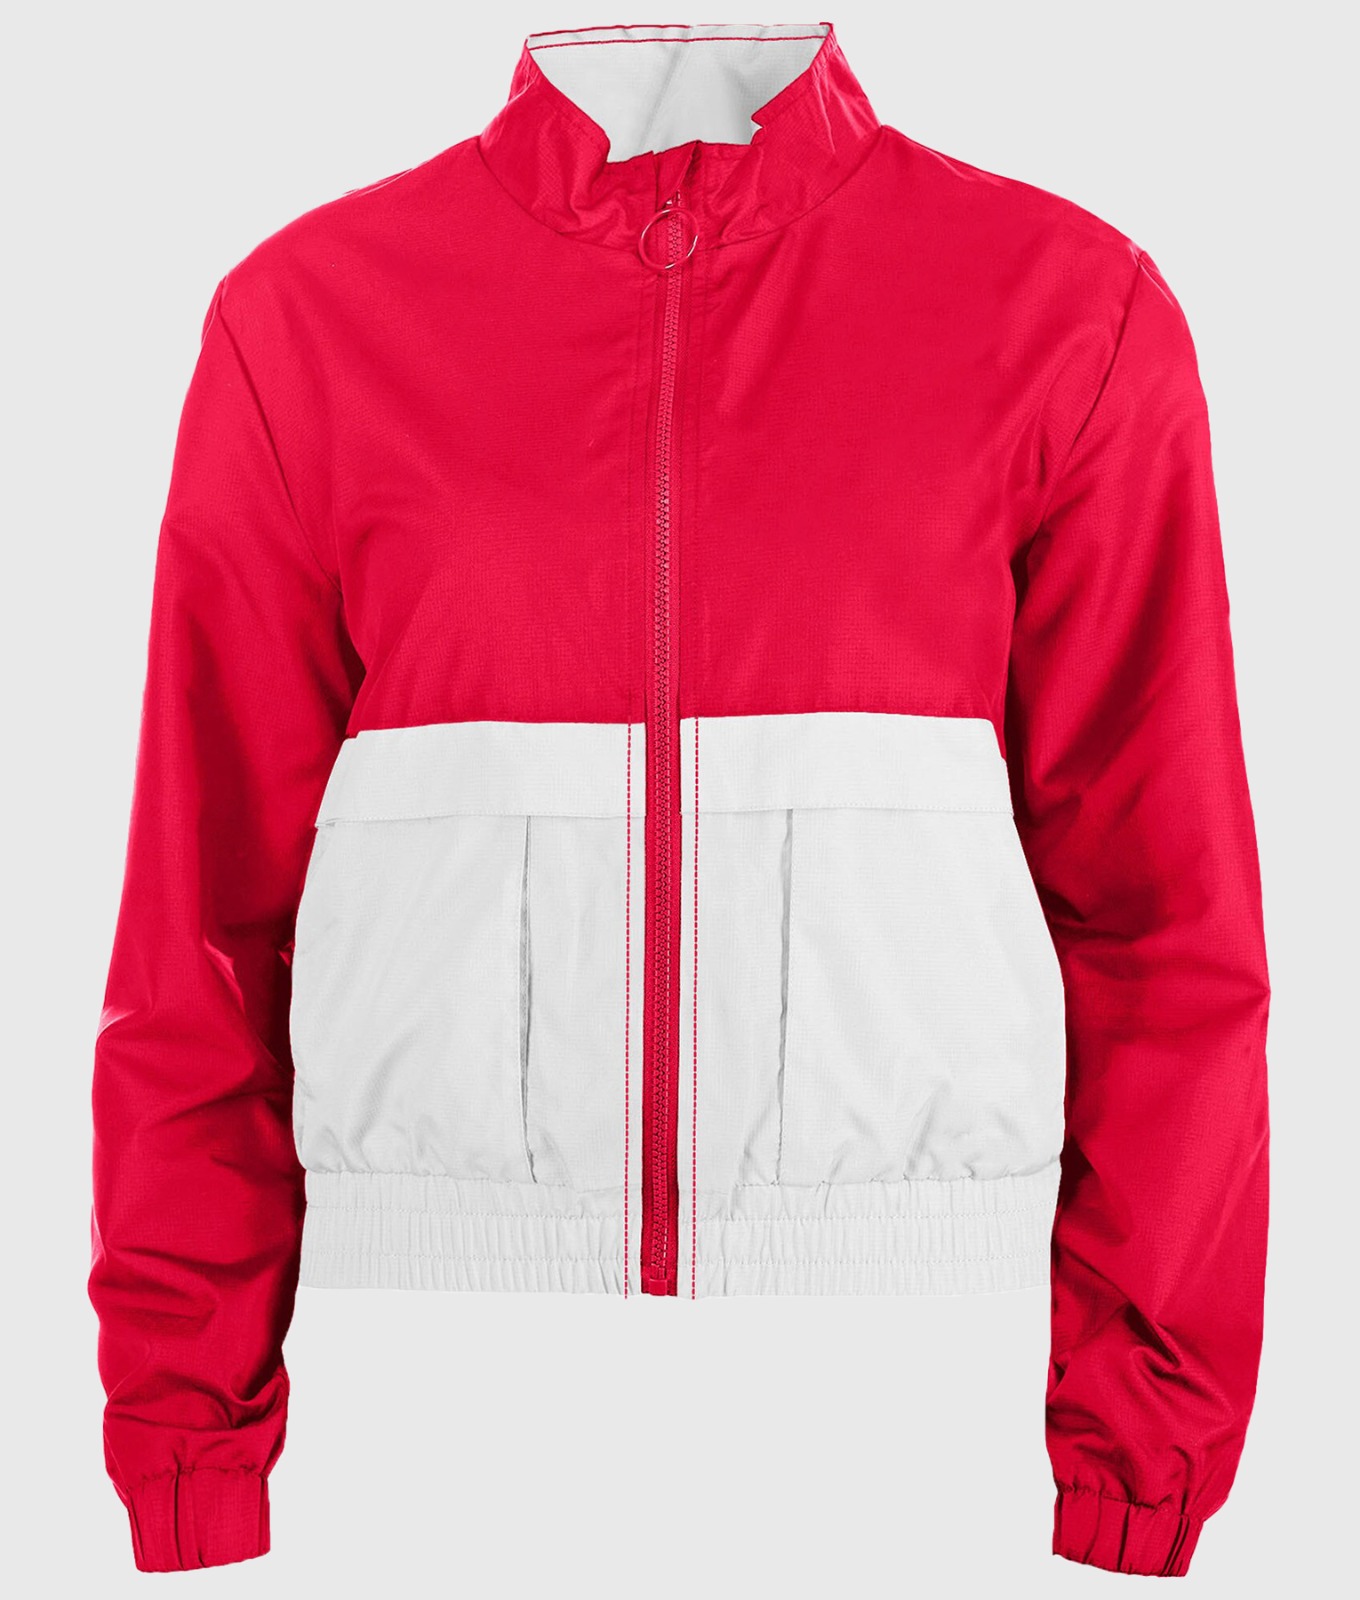 Taylor Swift Kansas City Chiefs Red And White Jacket-1